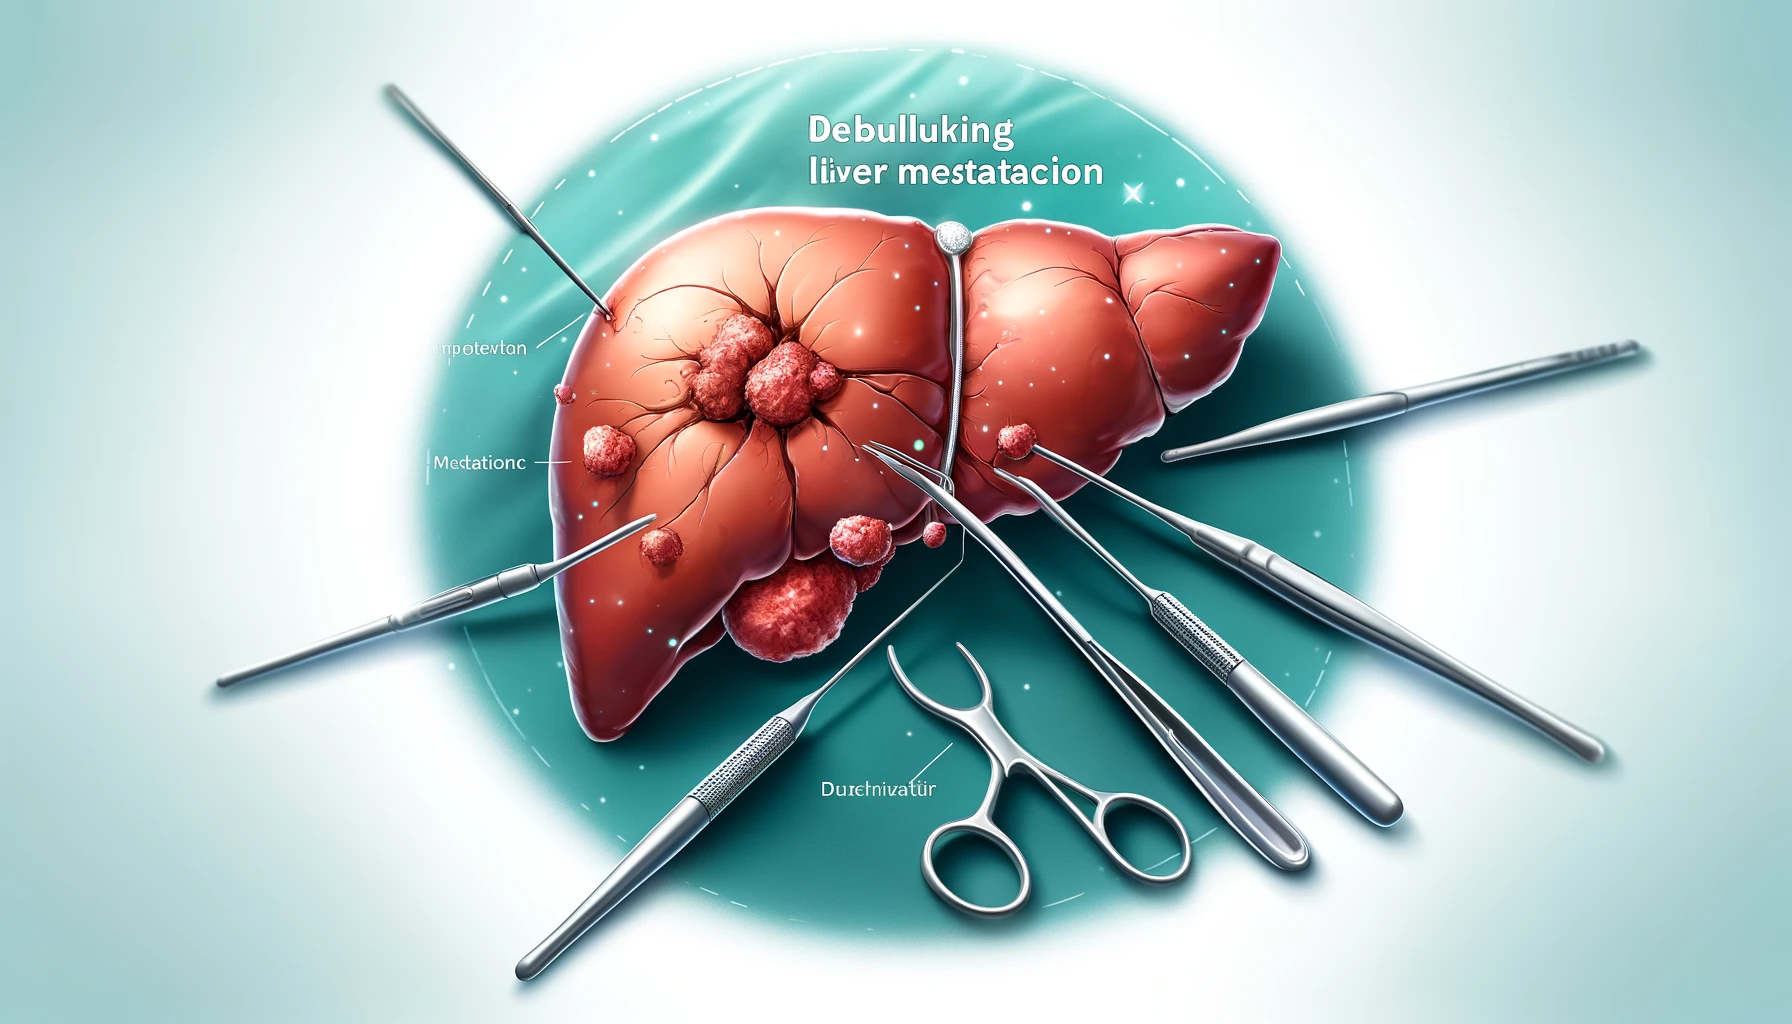 DALL·E 2024 06 09 18.45.40 An illustration of the liver showcasing a debulking hepatectomy procedure for colorectal liver metastasis CRLM. The image highlights the liver with